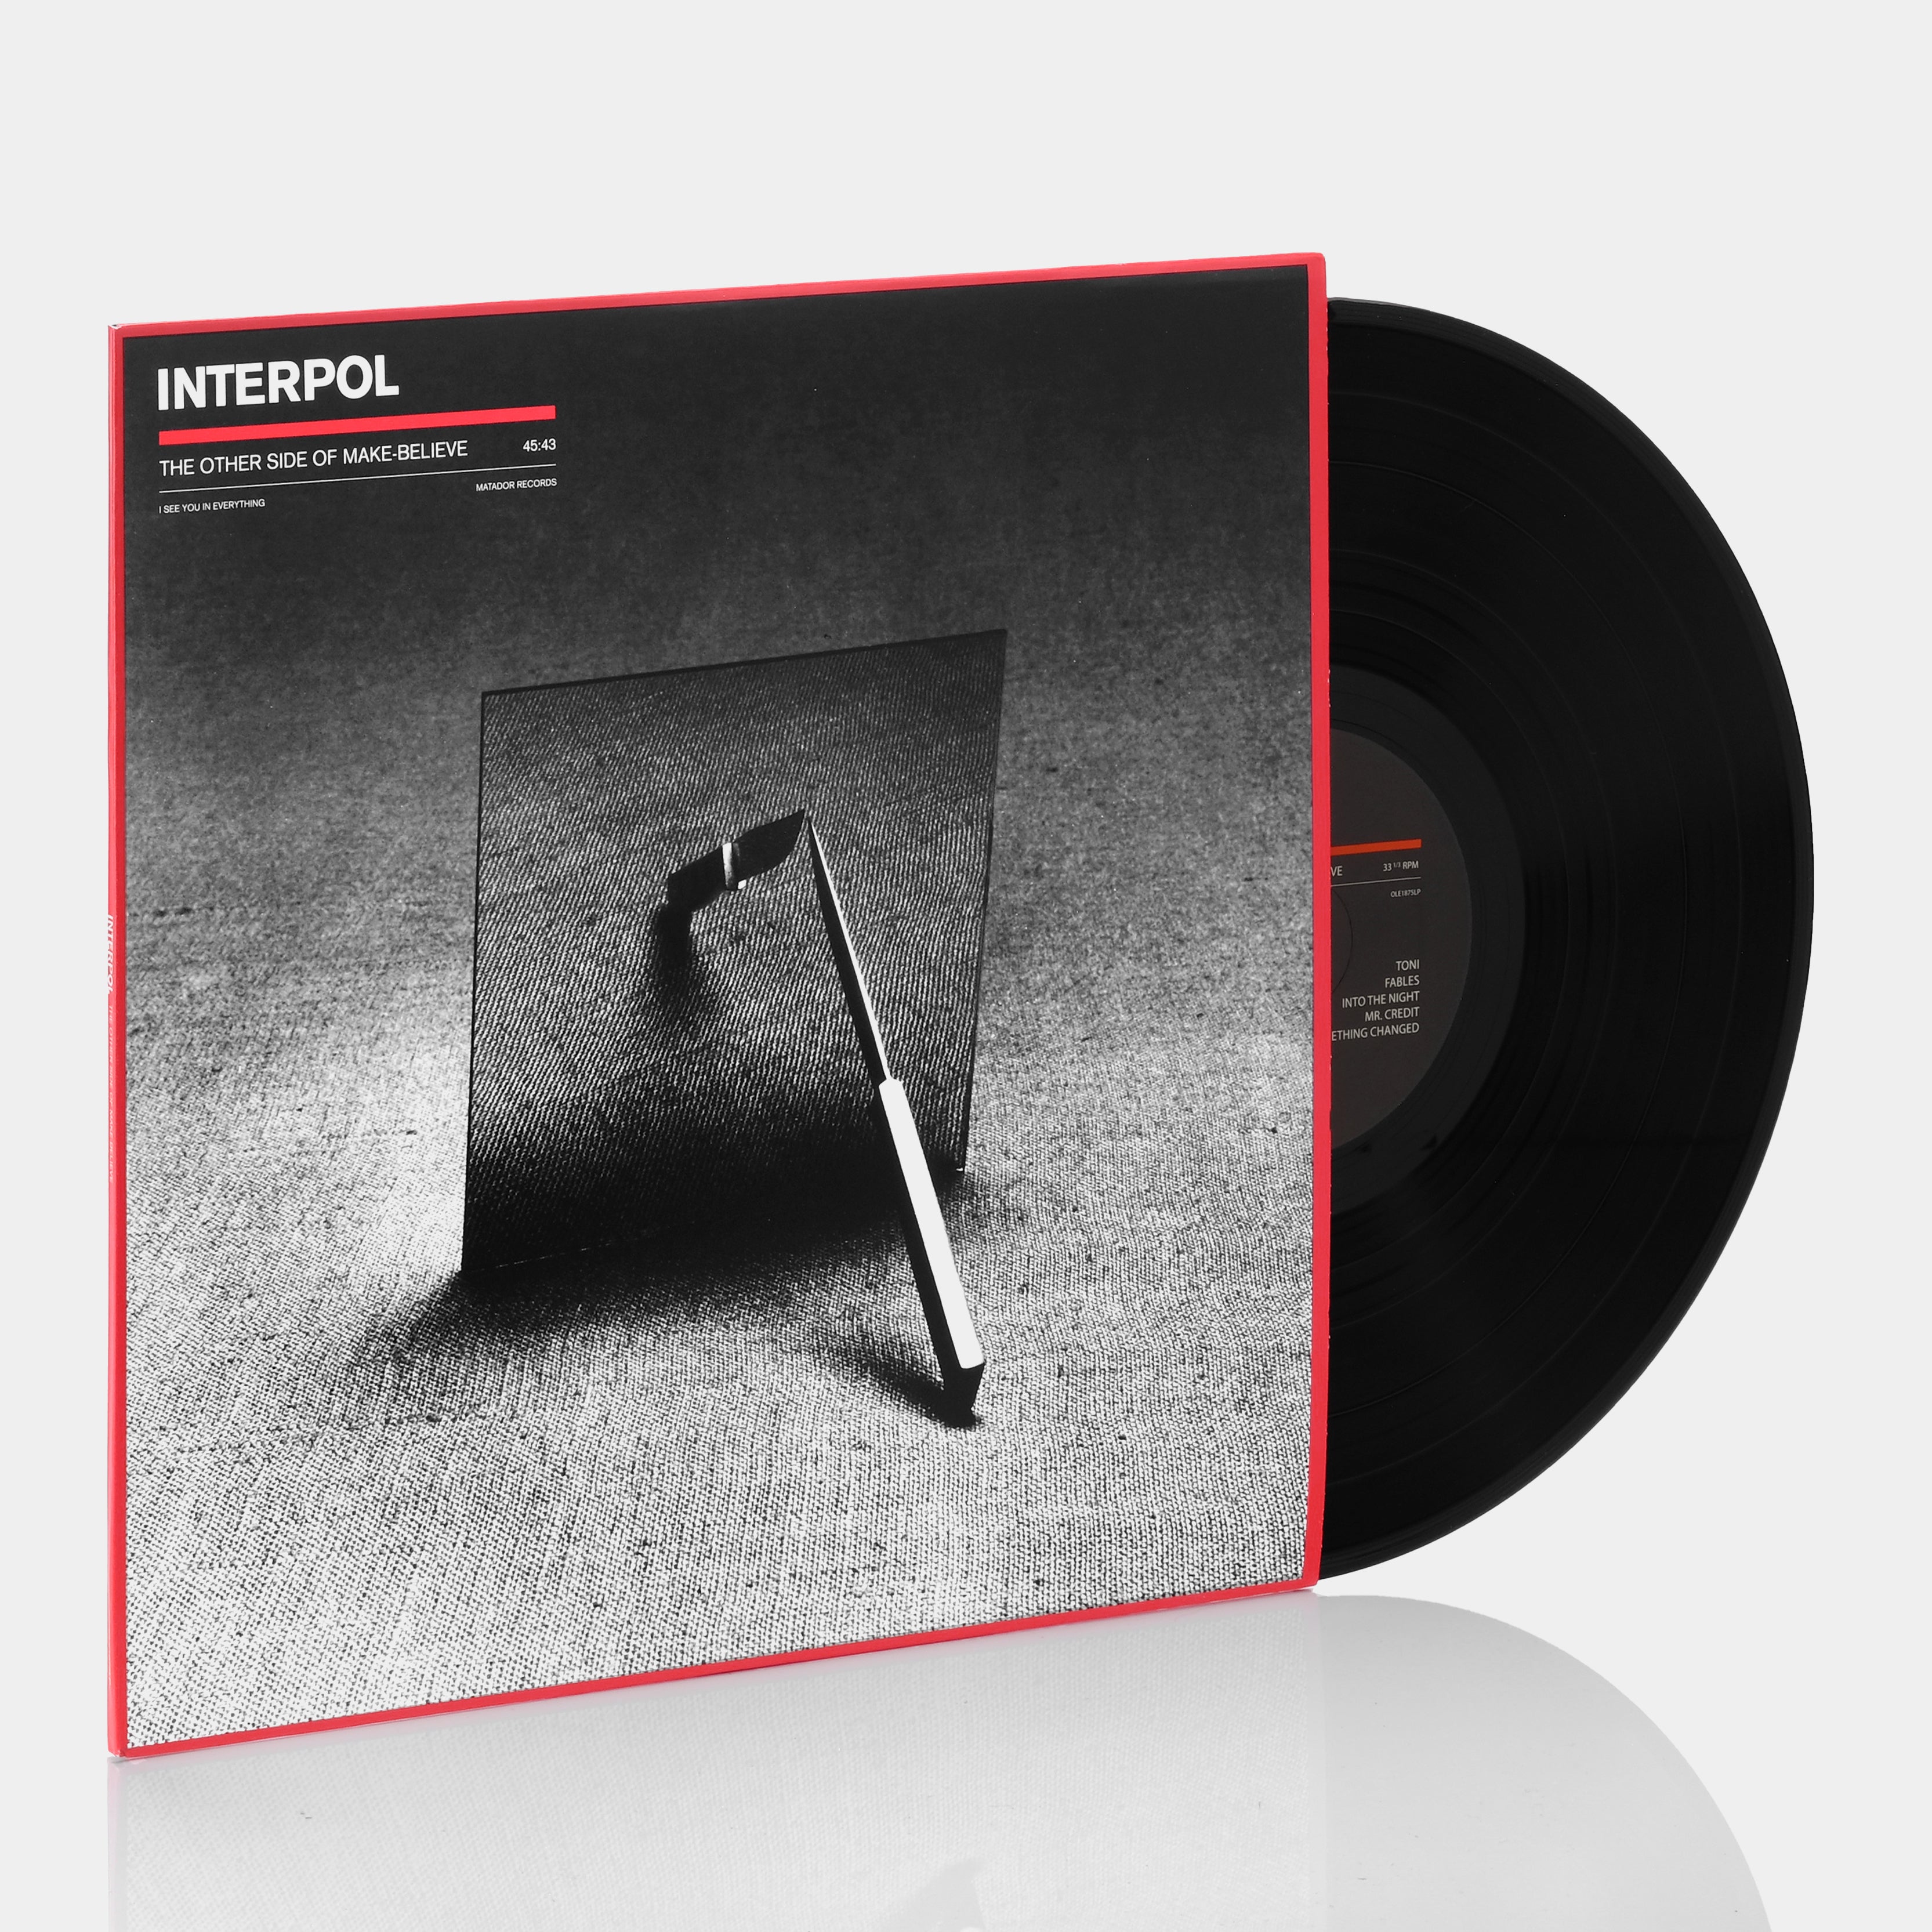 Interpol - The Other Side Of Make-Believe LP Vinyl Record